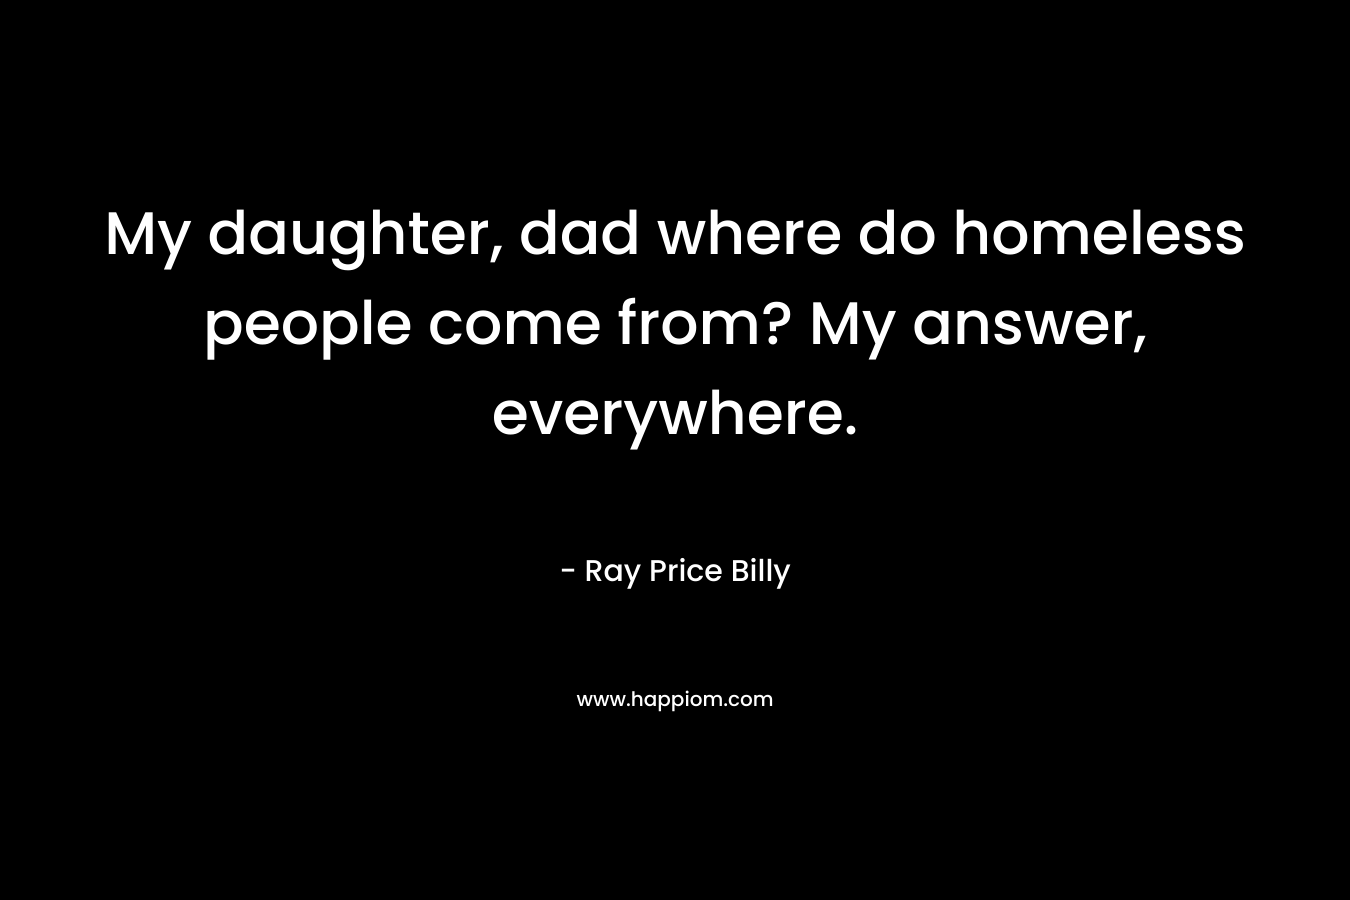 My daughter, dad where do homeless people come from? My answer, everywhere.